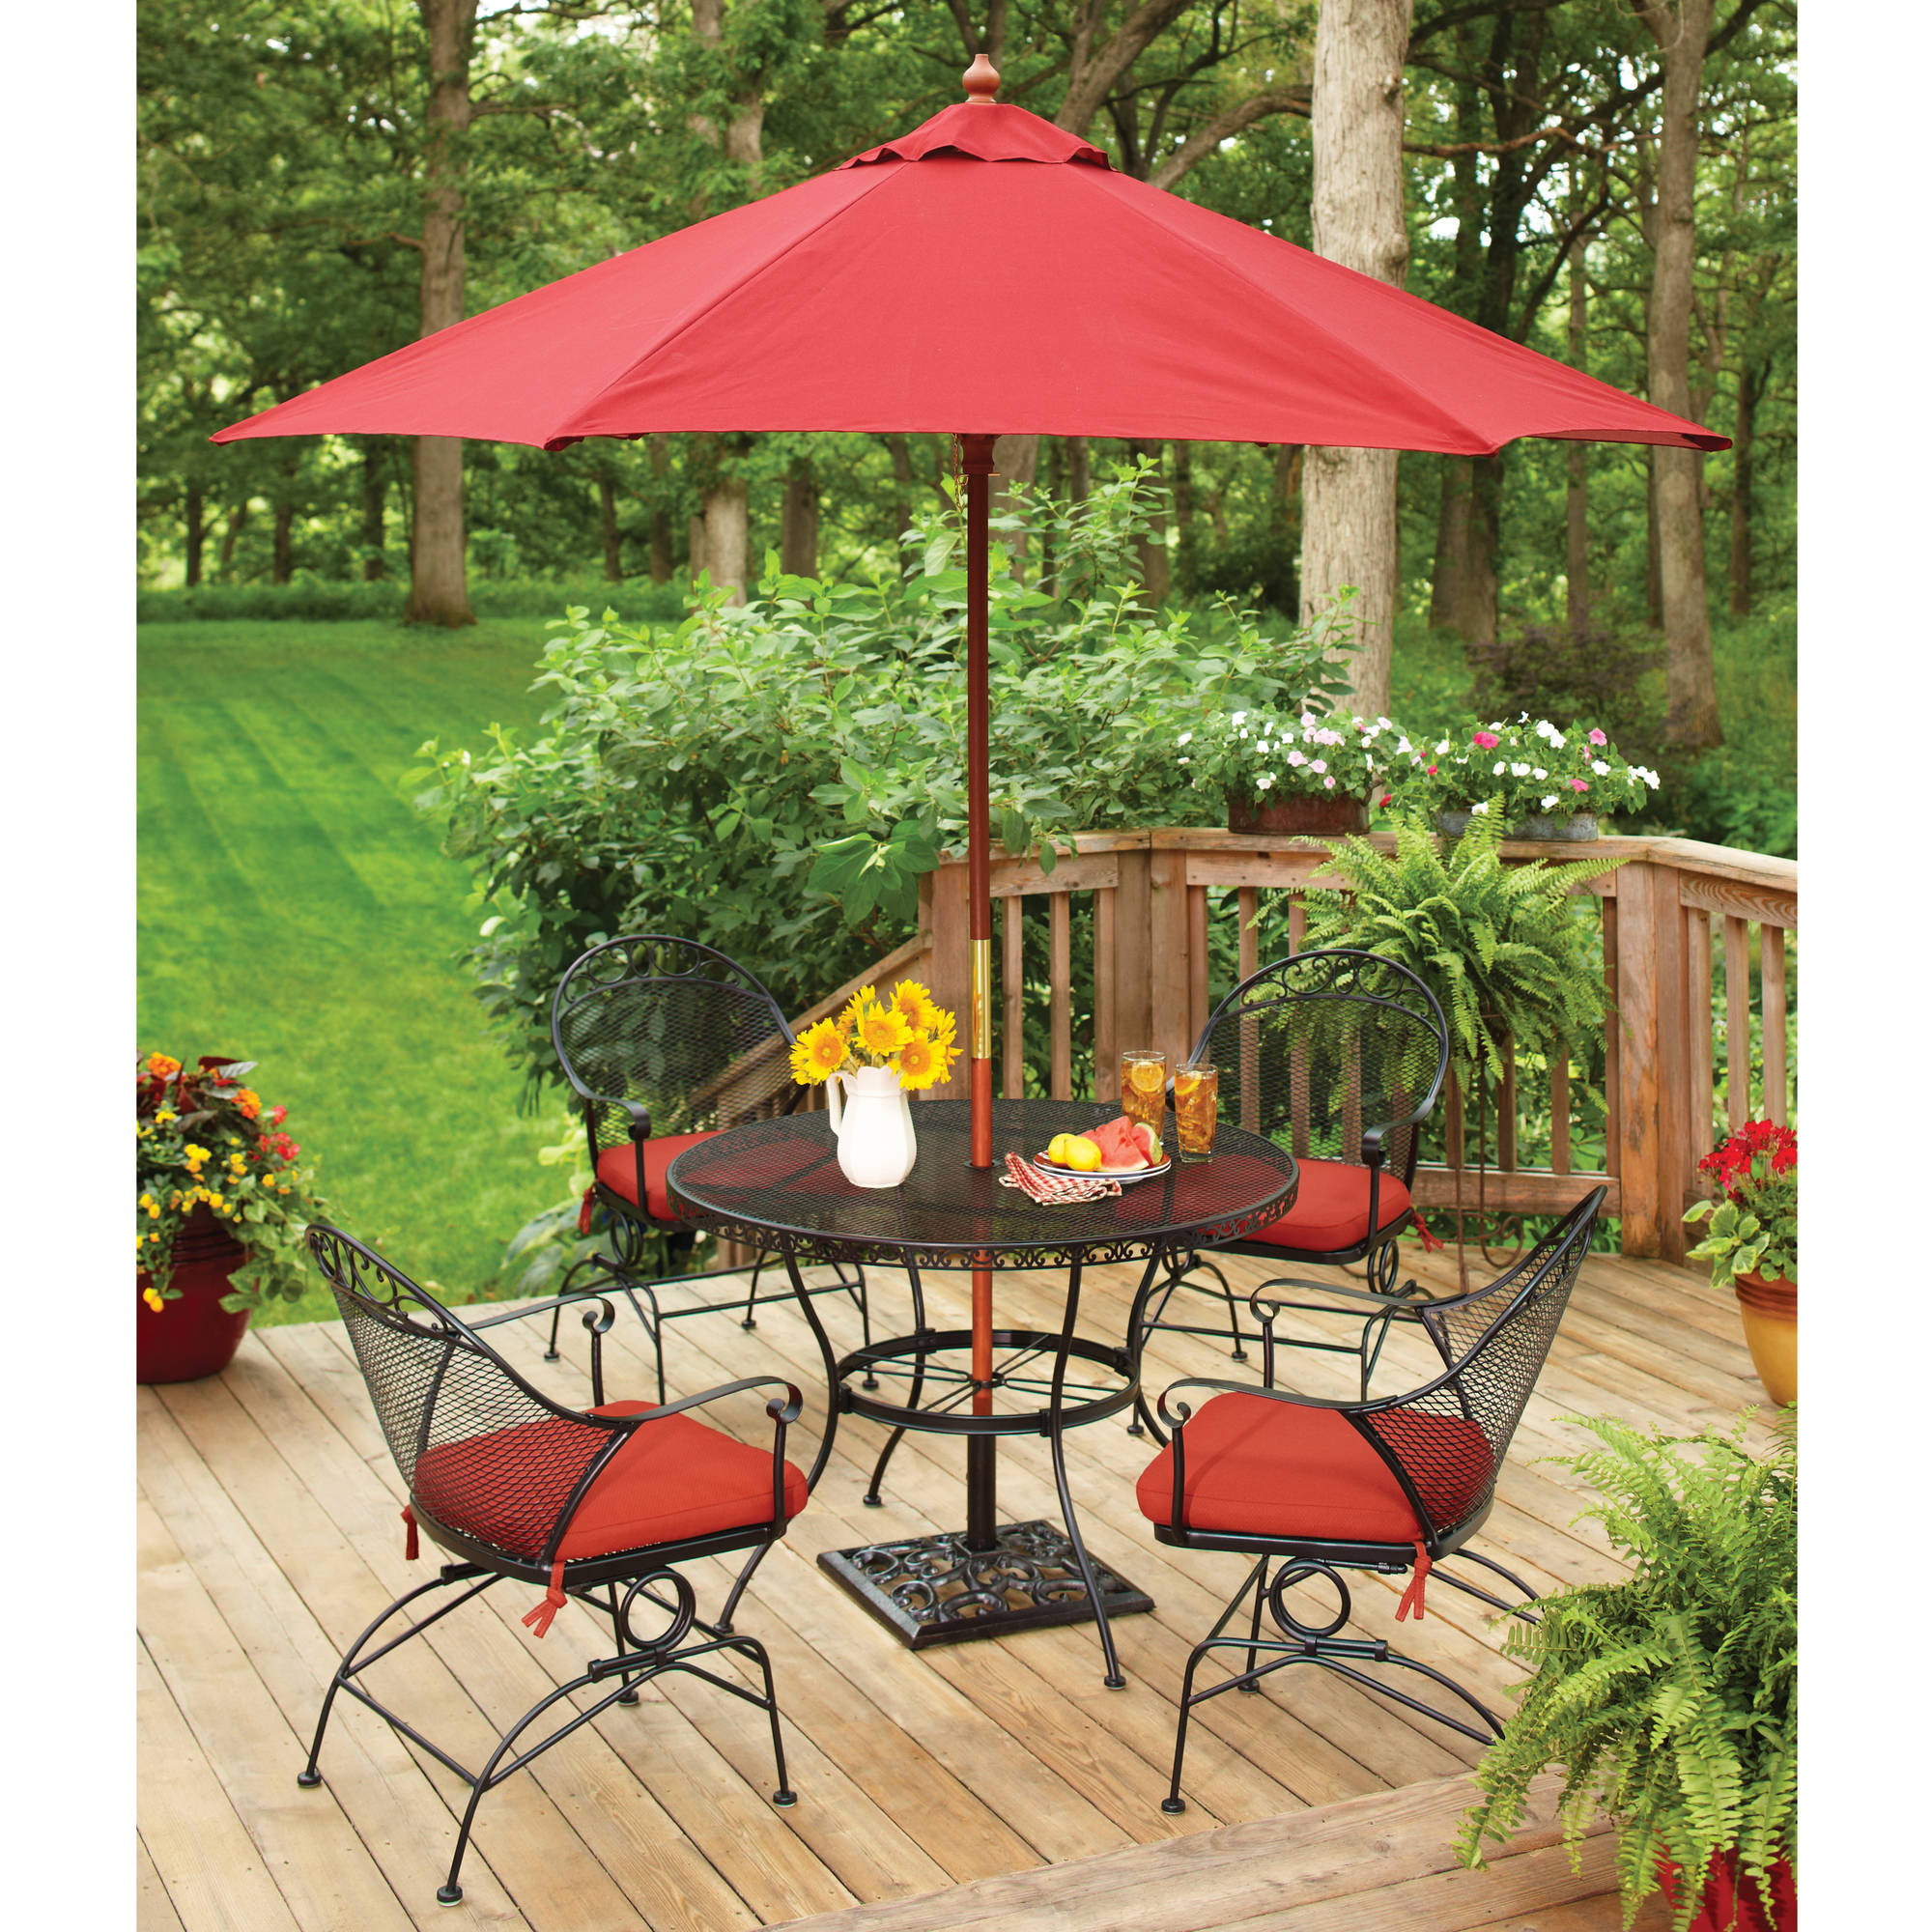 Better Homes and Gardens Wrought Iron Patio Dining Set, Clayton Court Cushioned 5 Piece, Red - image 2 of 11